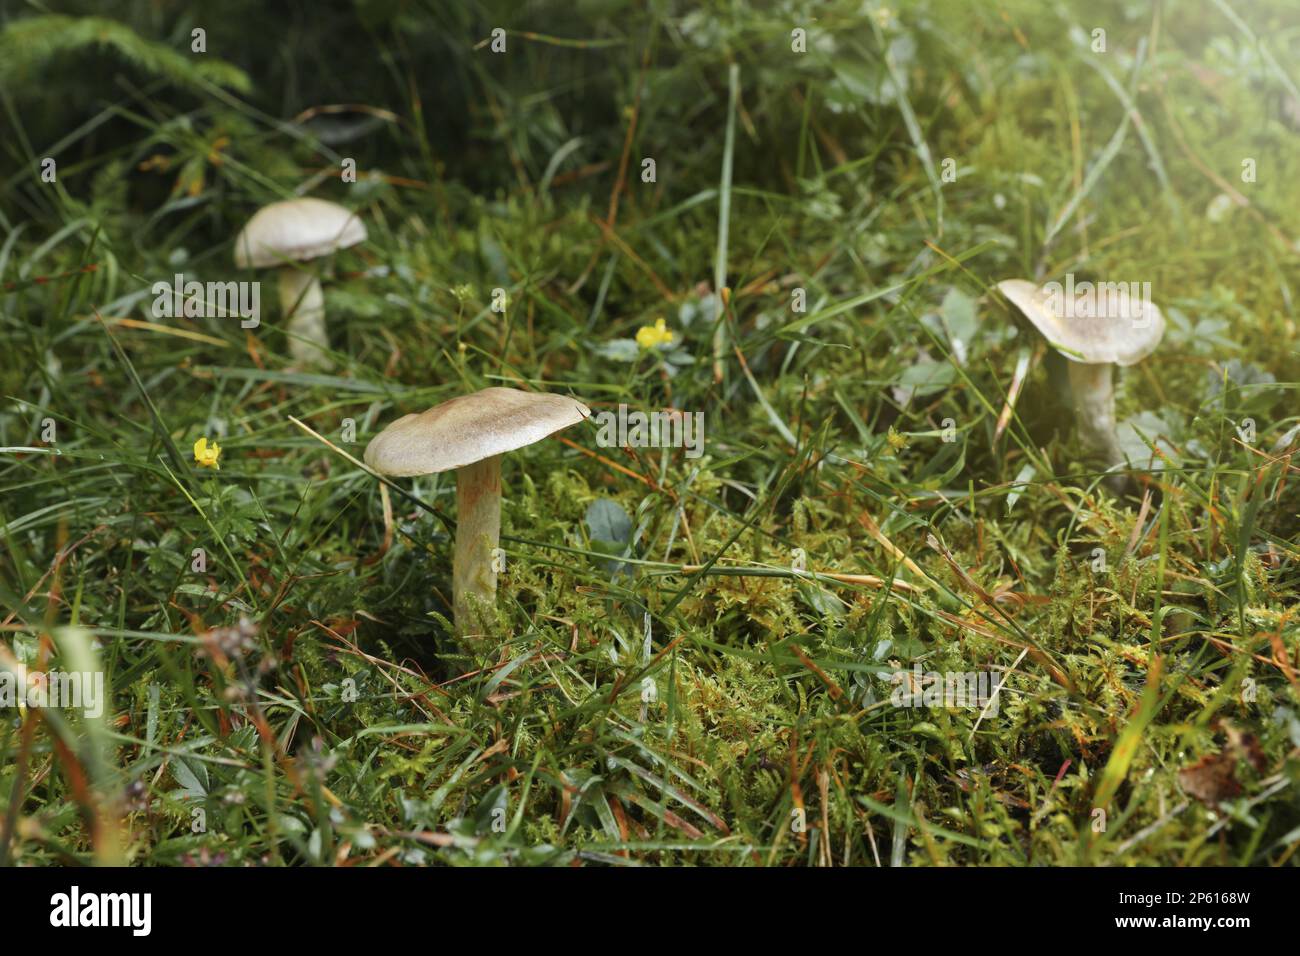 Many poisonous mushrooms growing in green forest Stock Photo